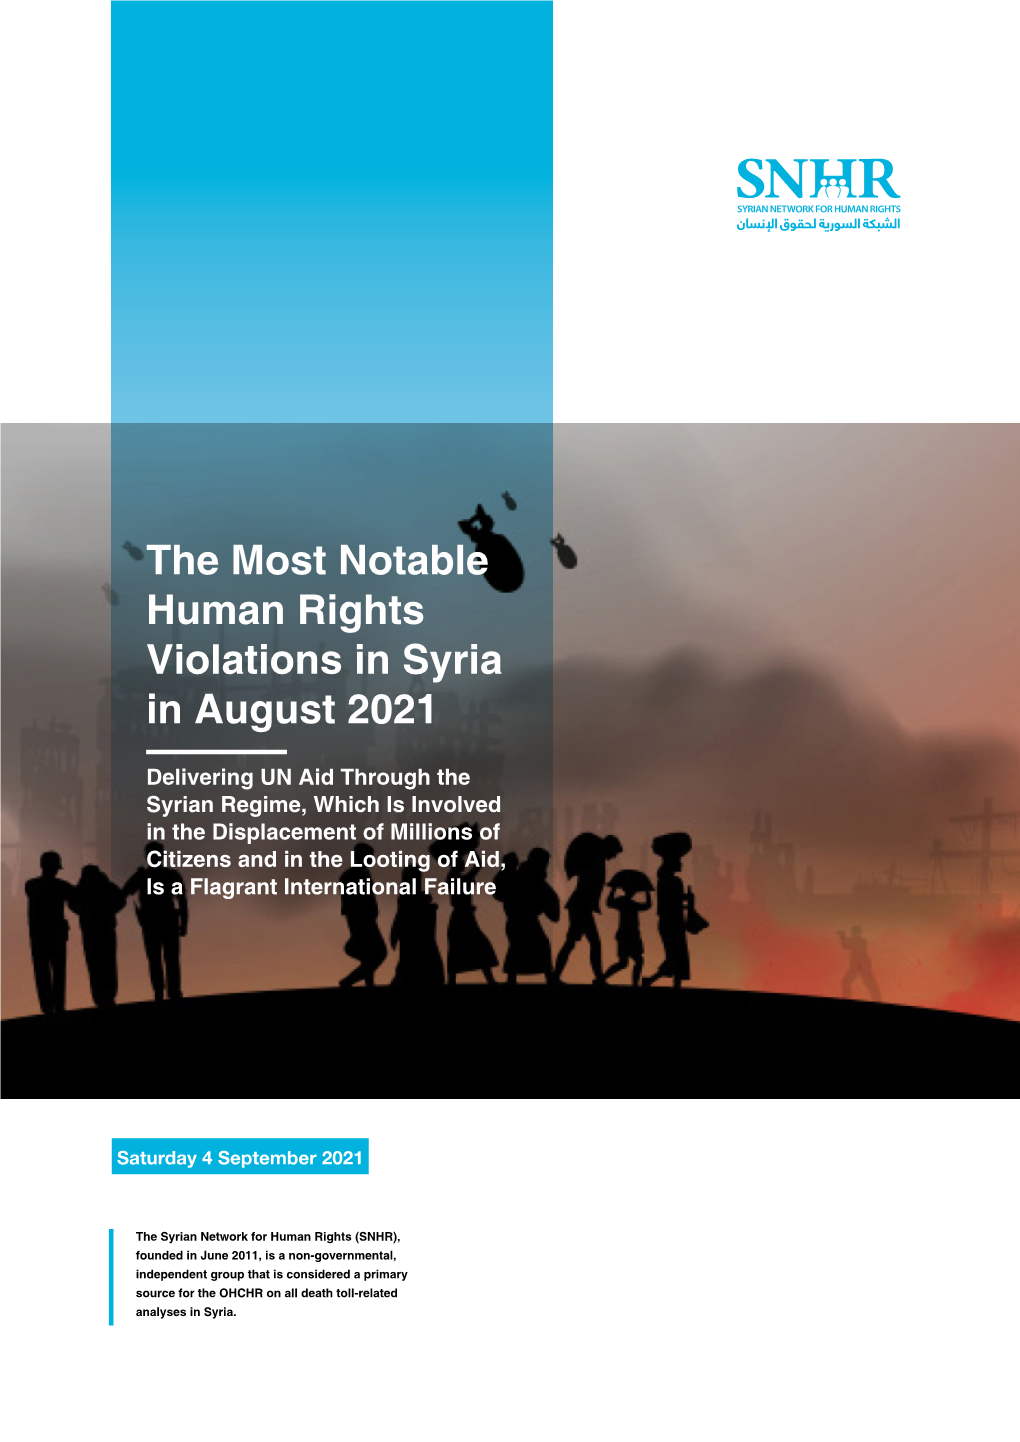 The Most Notable Human Rights Violations in Syria in August 2021